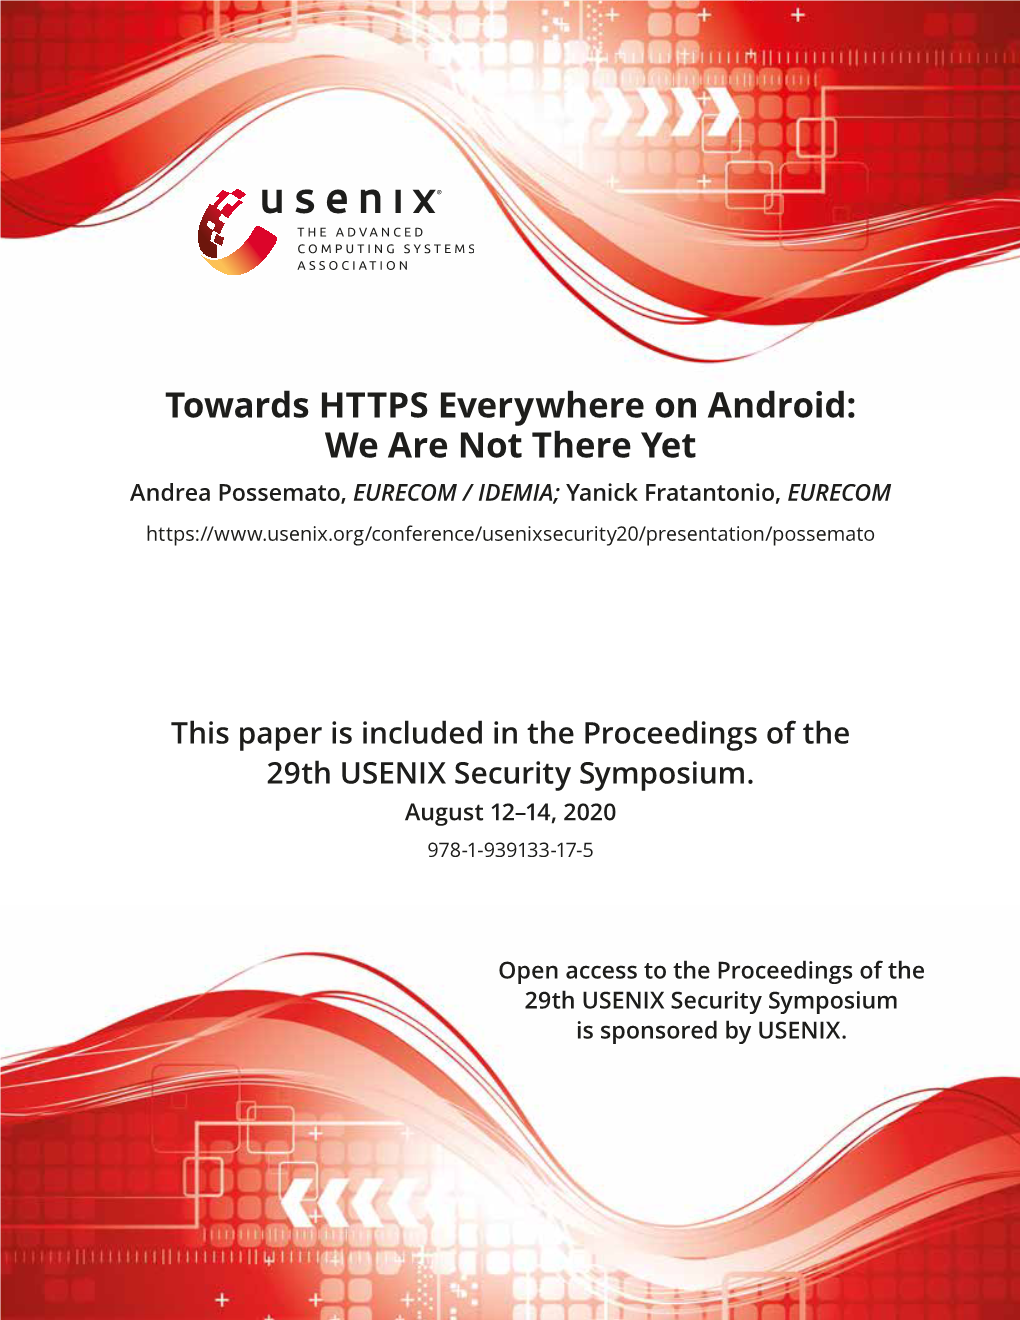 Towards HTTPS Everywhere on Android: We Are Not There